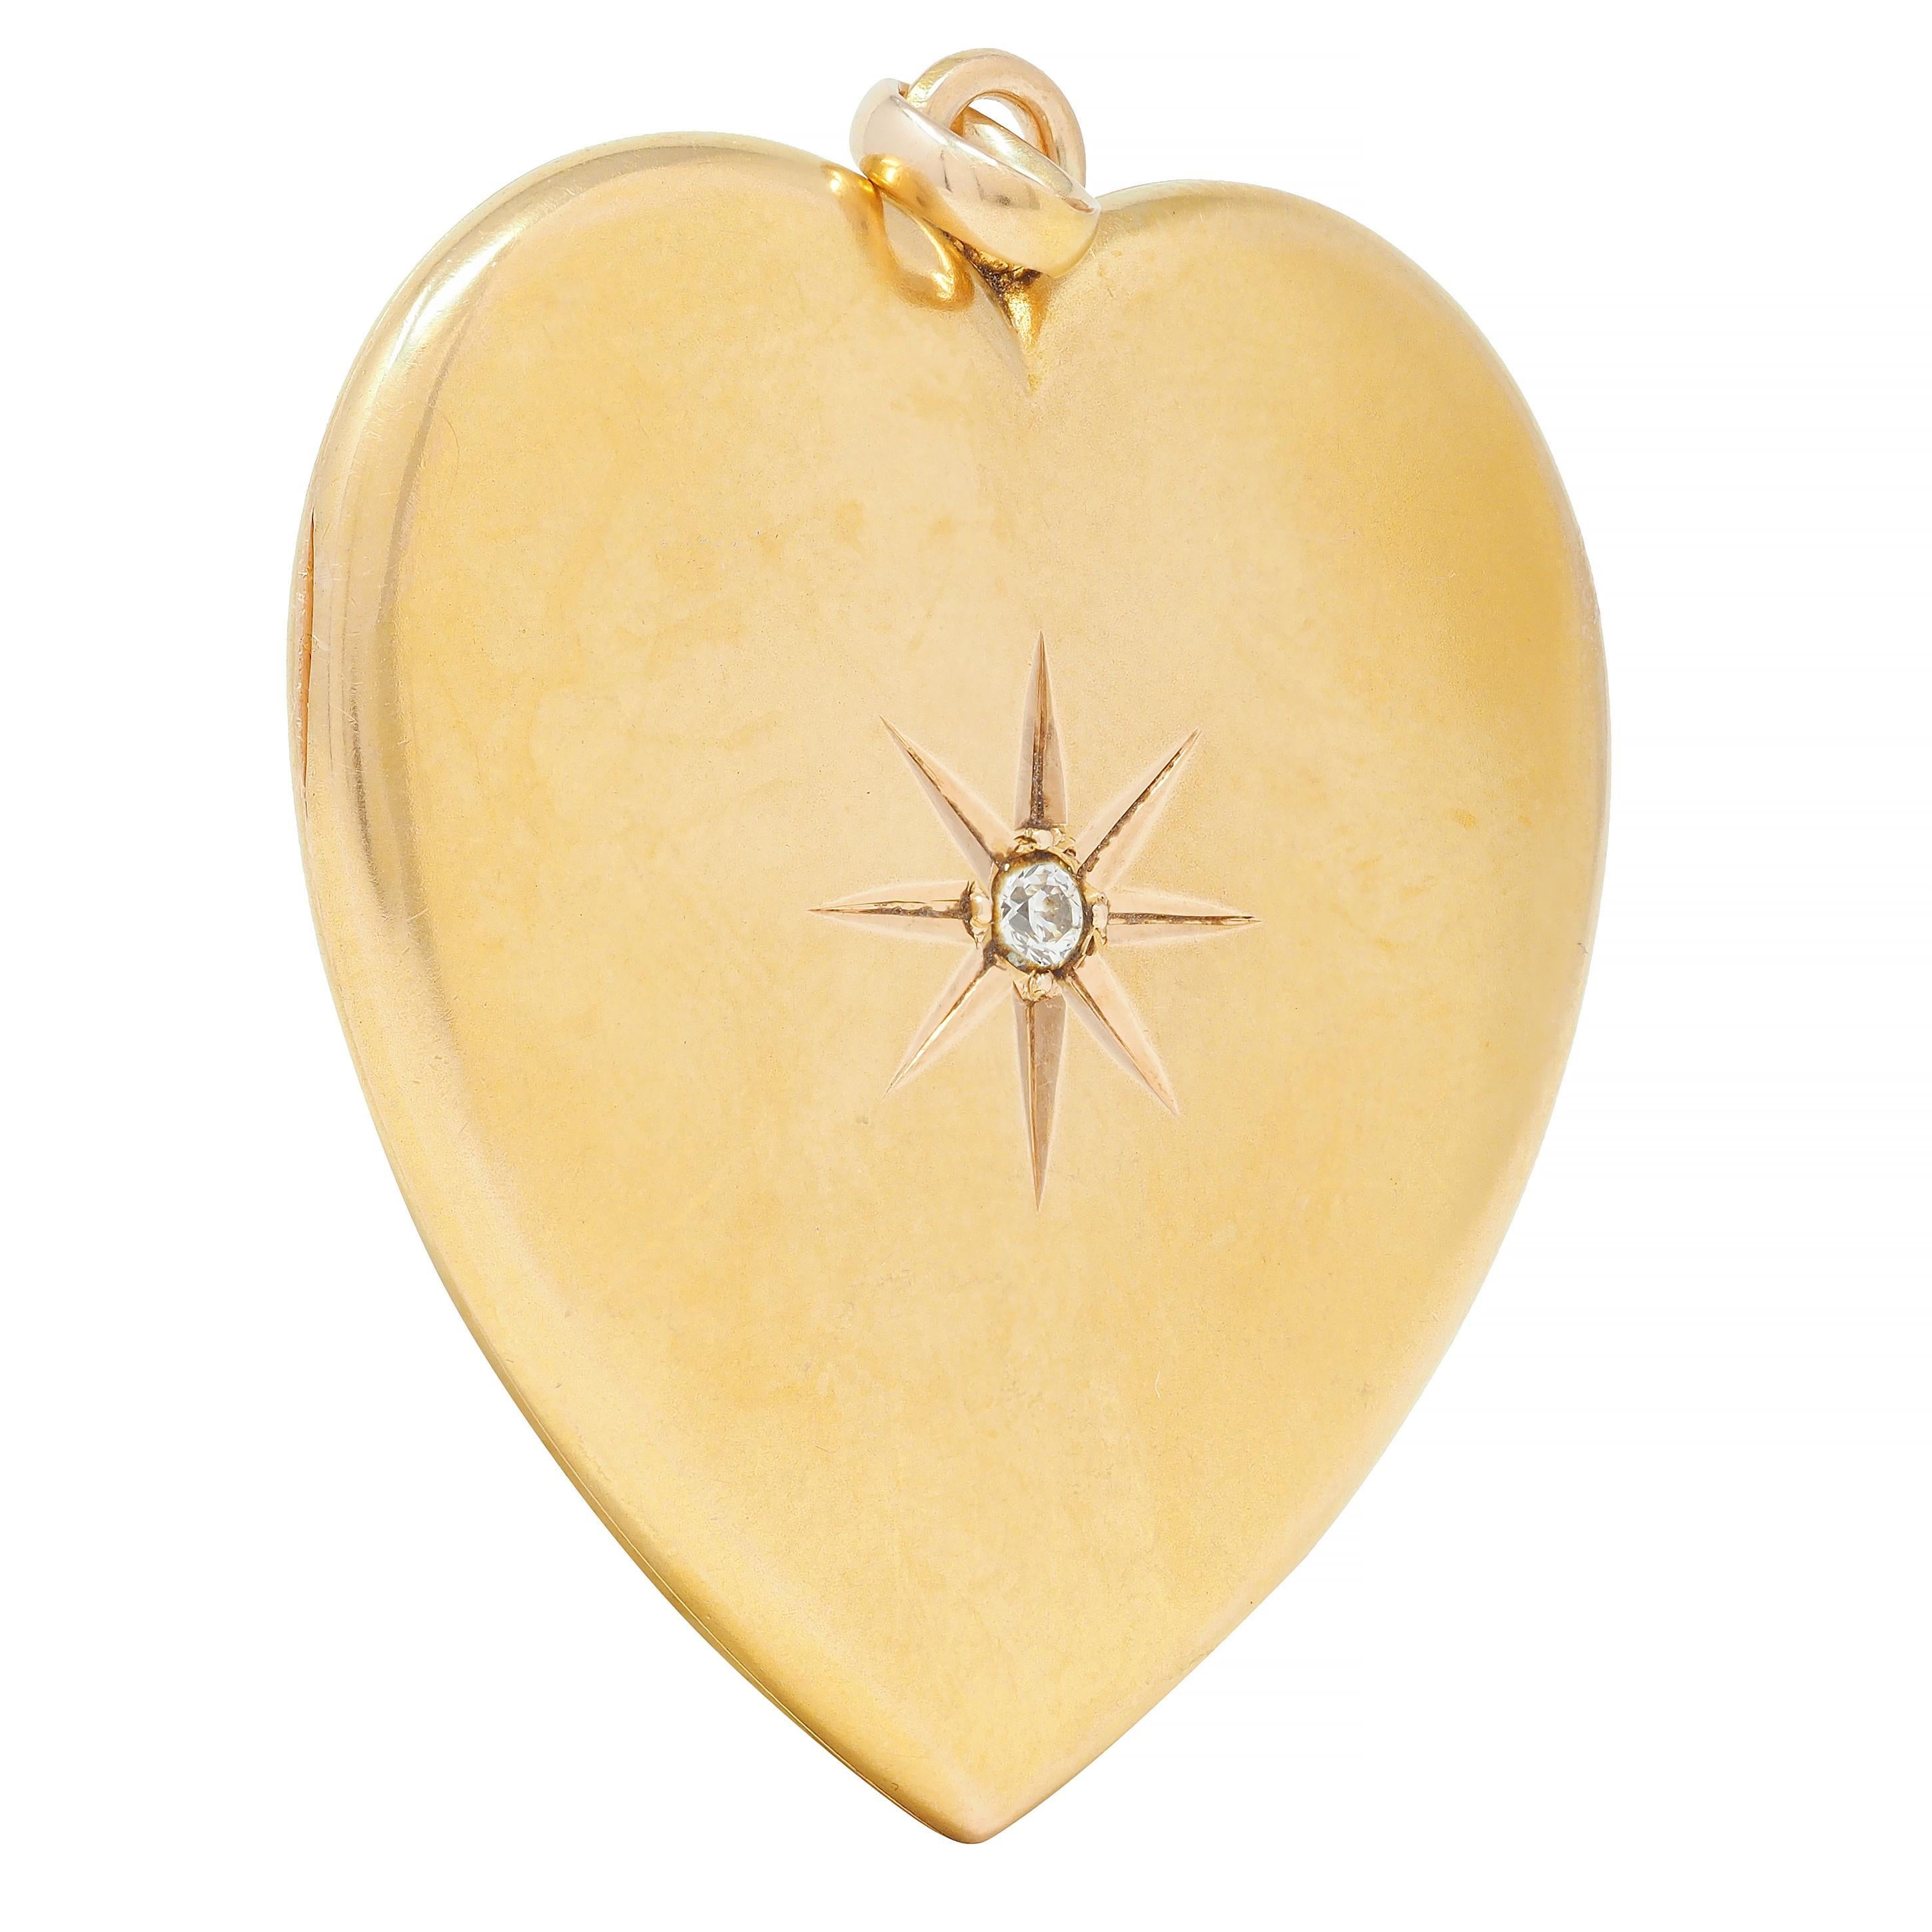 Designed as a heart shape centering an old European cut diamond 
Weighing approximately 0.08 carat - eye clean and bright
Bead set in the center of an engraved starburst motif 
Hinged and opens to reveal two heart-shaped recesses
Featuring removable